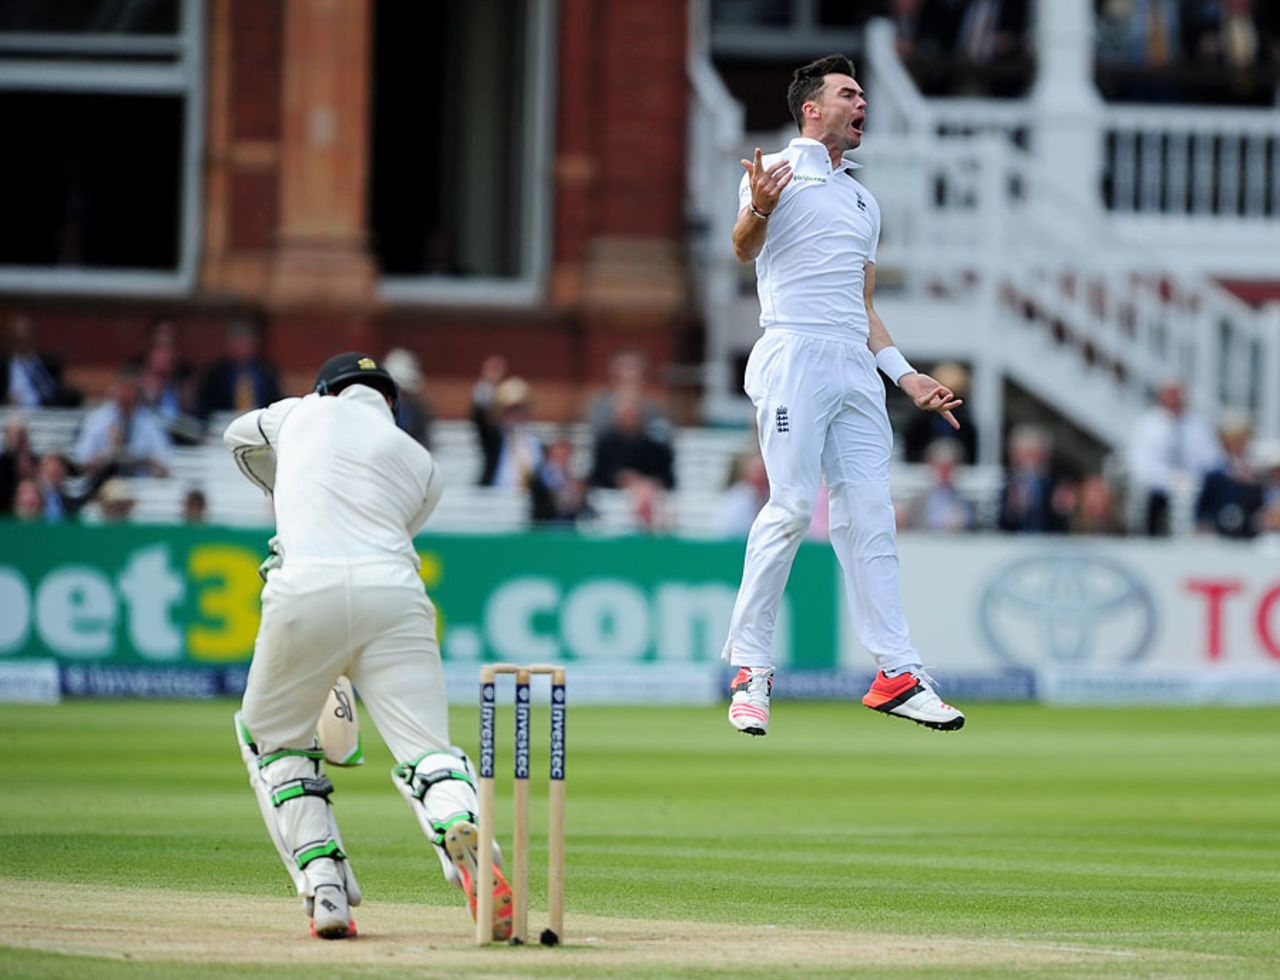 James Anderson removed Martin Guptill second ball, England v New Zealand, 1st Investec Test, Lord's, 5th day, May 25, 2015